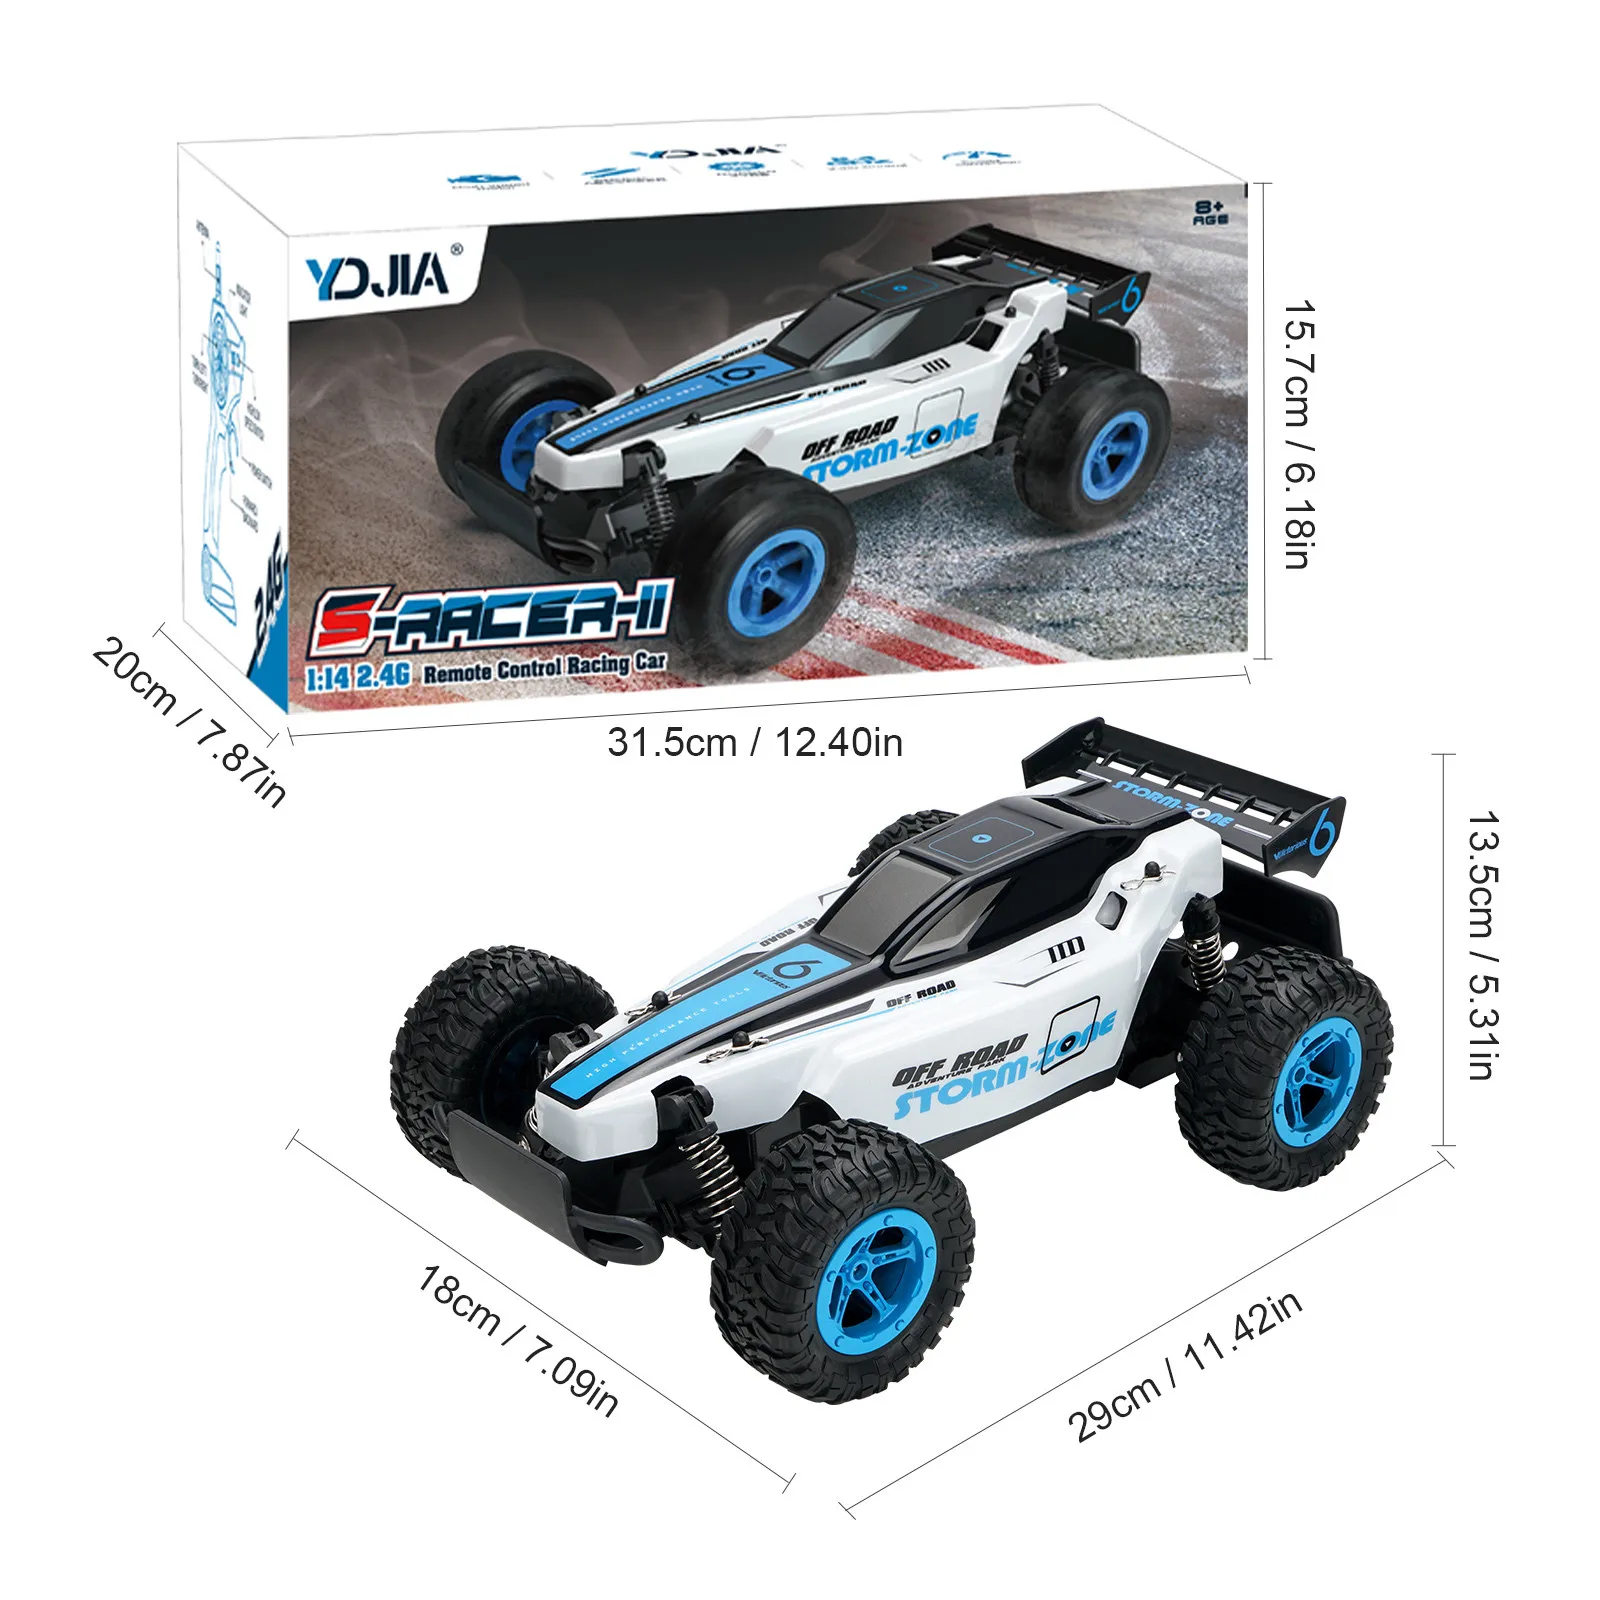 

1/14 RC Car 2.4GHz 4WD Four-Wheel Radio Controlled Off-Road Race Remote Control Drift Car Toys for Boys Childrens Gift